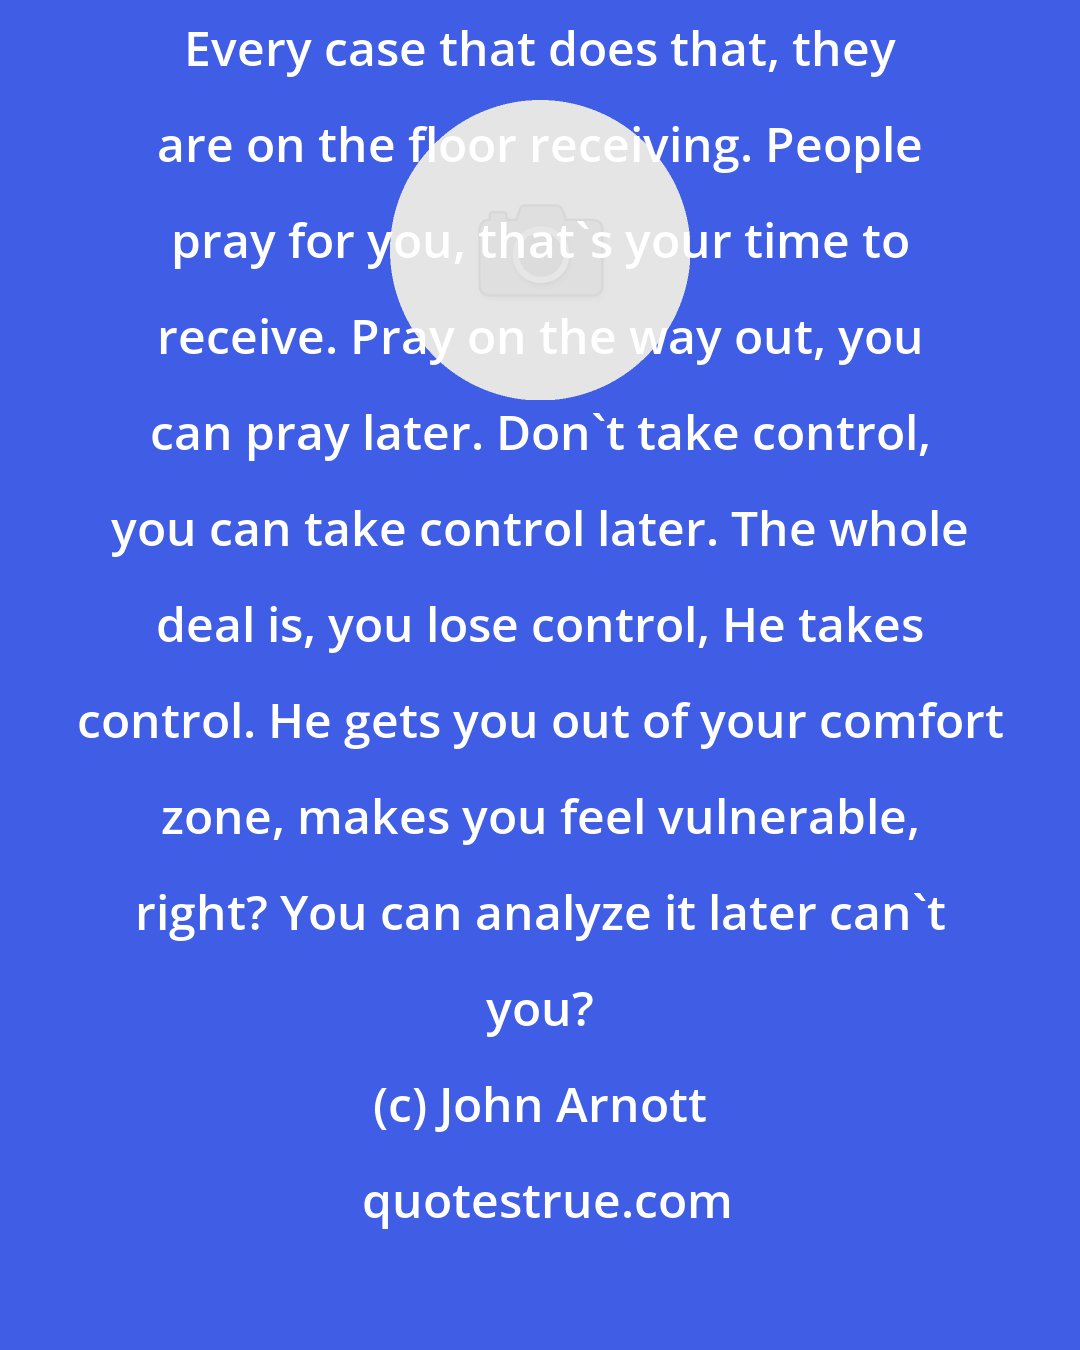 John Arnott: Be like a sponge and desire the Lord with everything that's within you. Every case that does that, they are on the floor receiving. People pray for you, that's your time to receive. Pray on the way out, you can pray later. Don't take control, you can take control later. The whole deal is, you lose control, He takes control. He gets you out of your comfort zone, makes you feel vulnerable, right? You can analyze it later can't you?